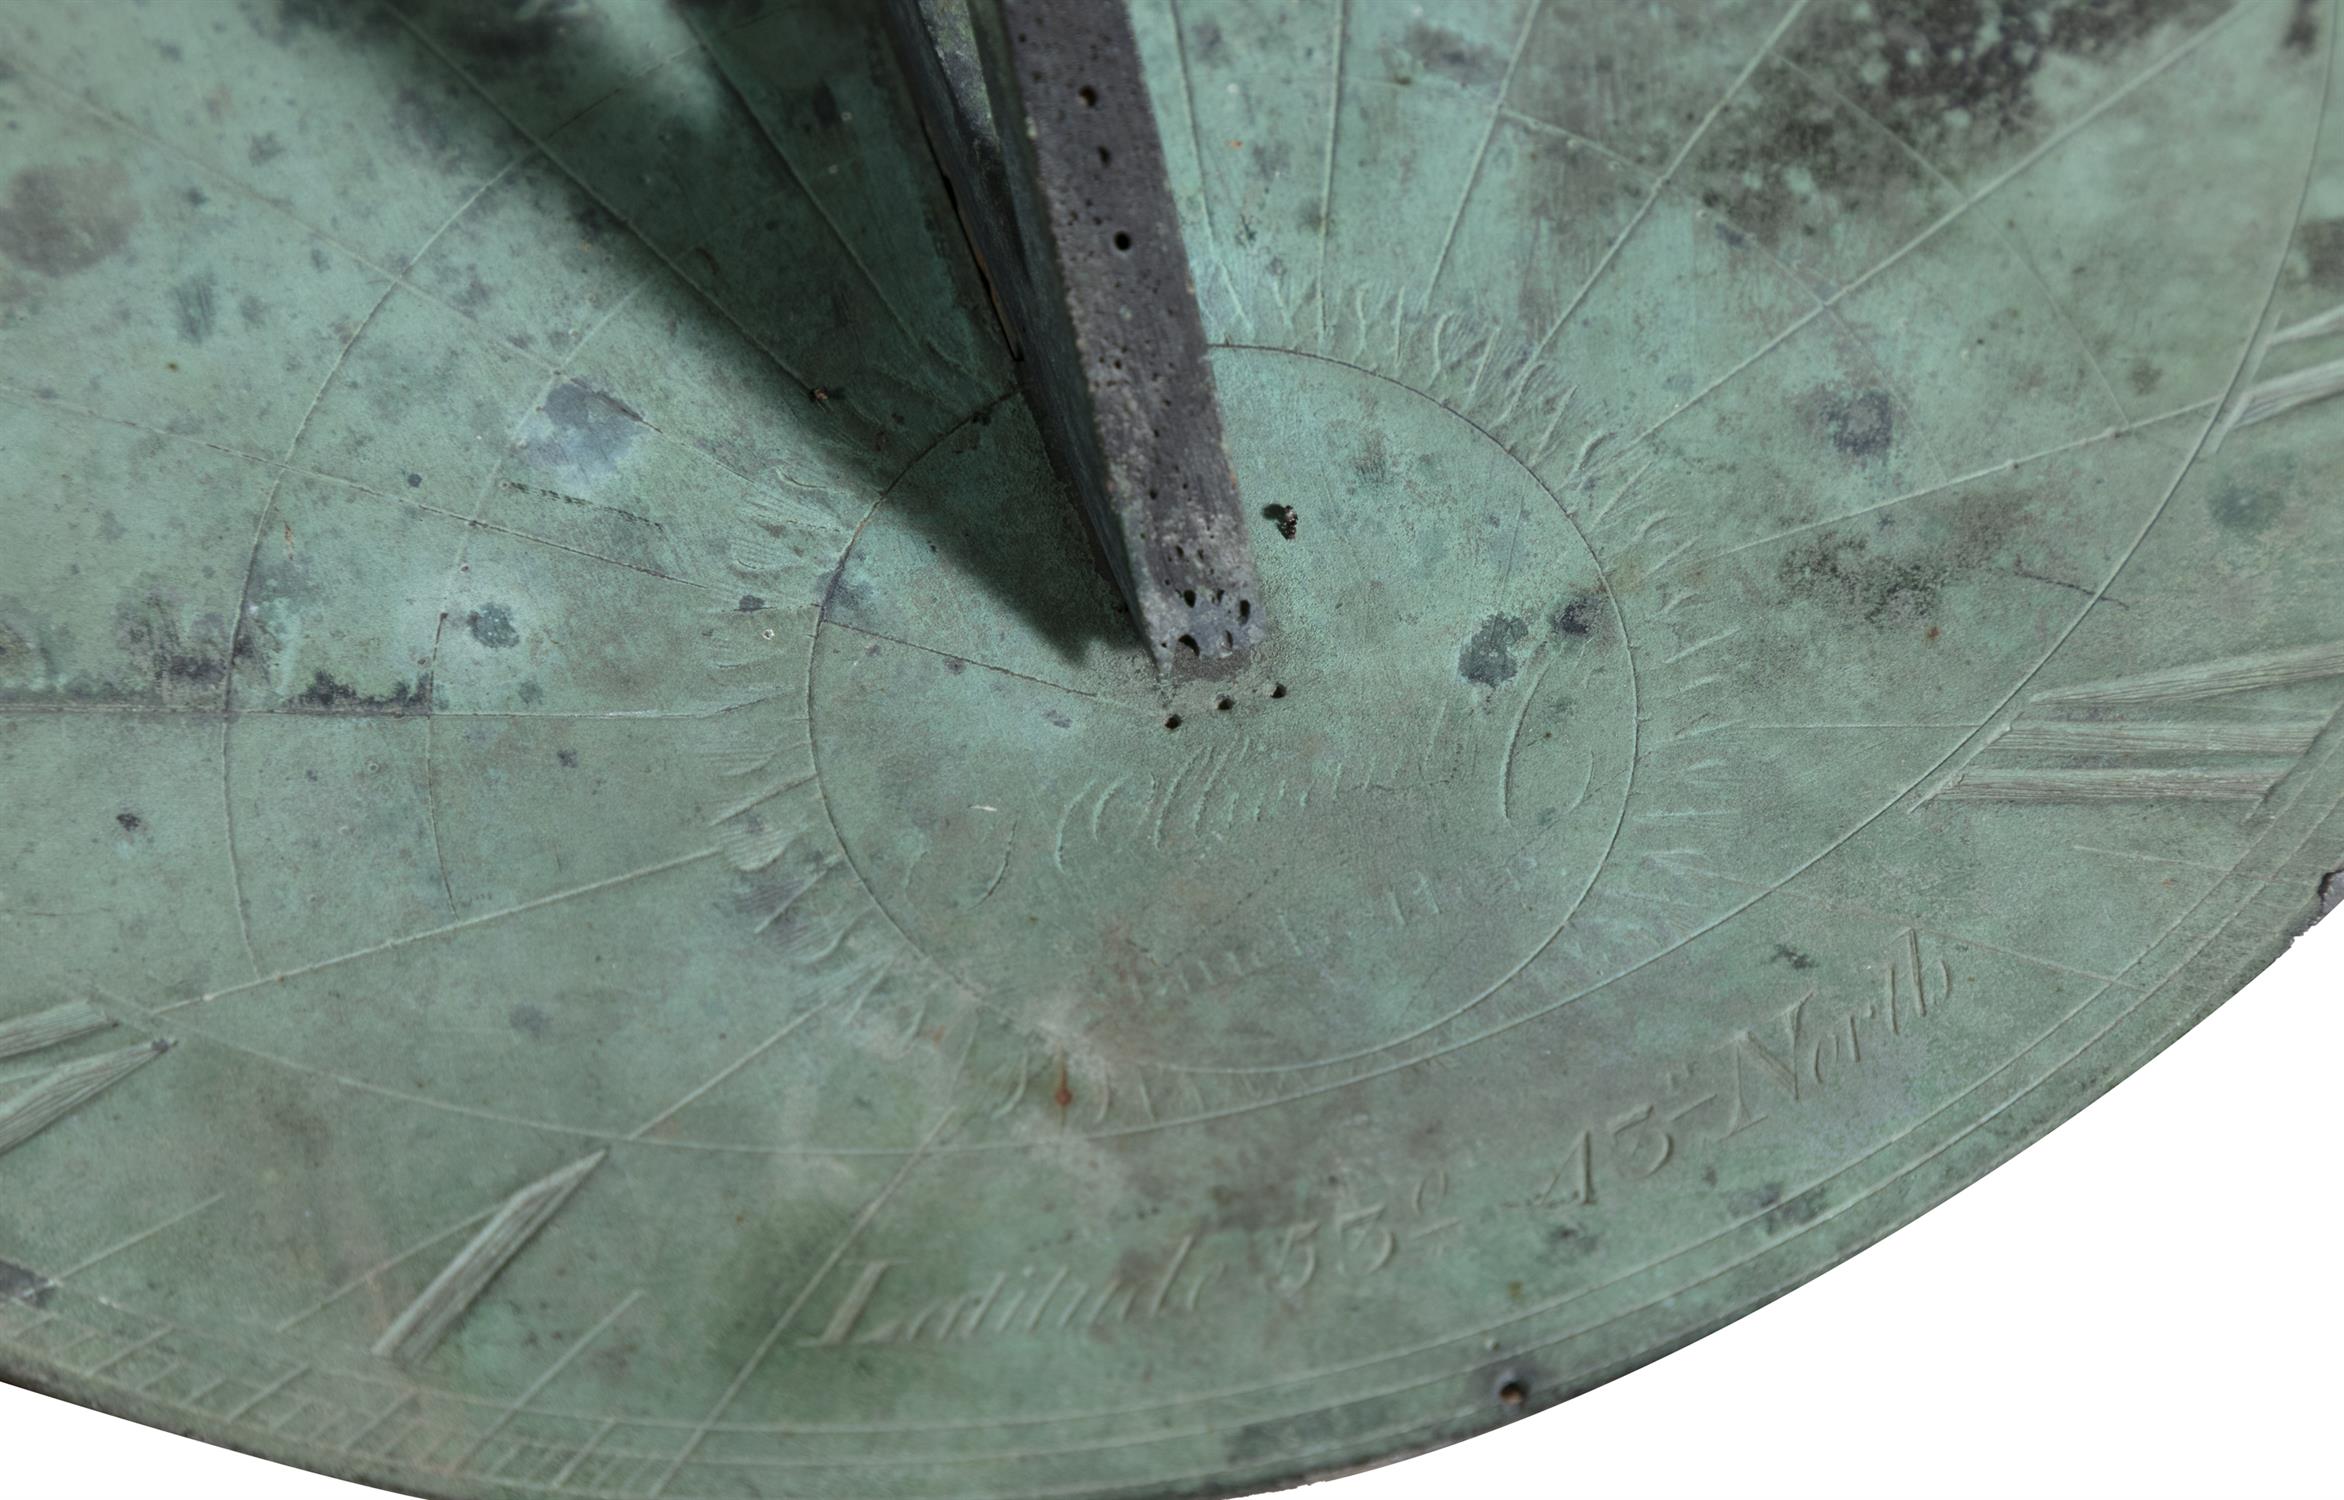 AN ENGRAVED BRONZE CIRCULAR SUNDIAL, SIGNED RICHARD CALROW, 1816 drawn for 53 latitude North, - Image 3 of 3